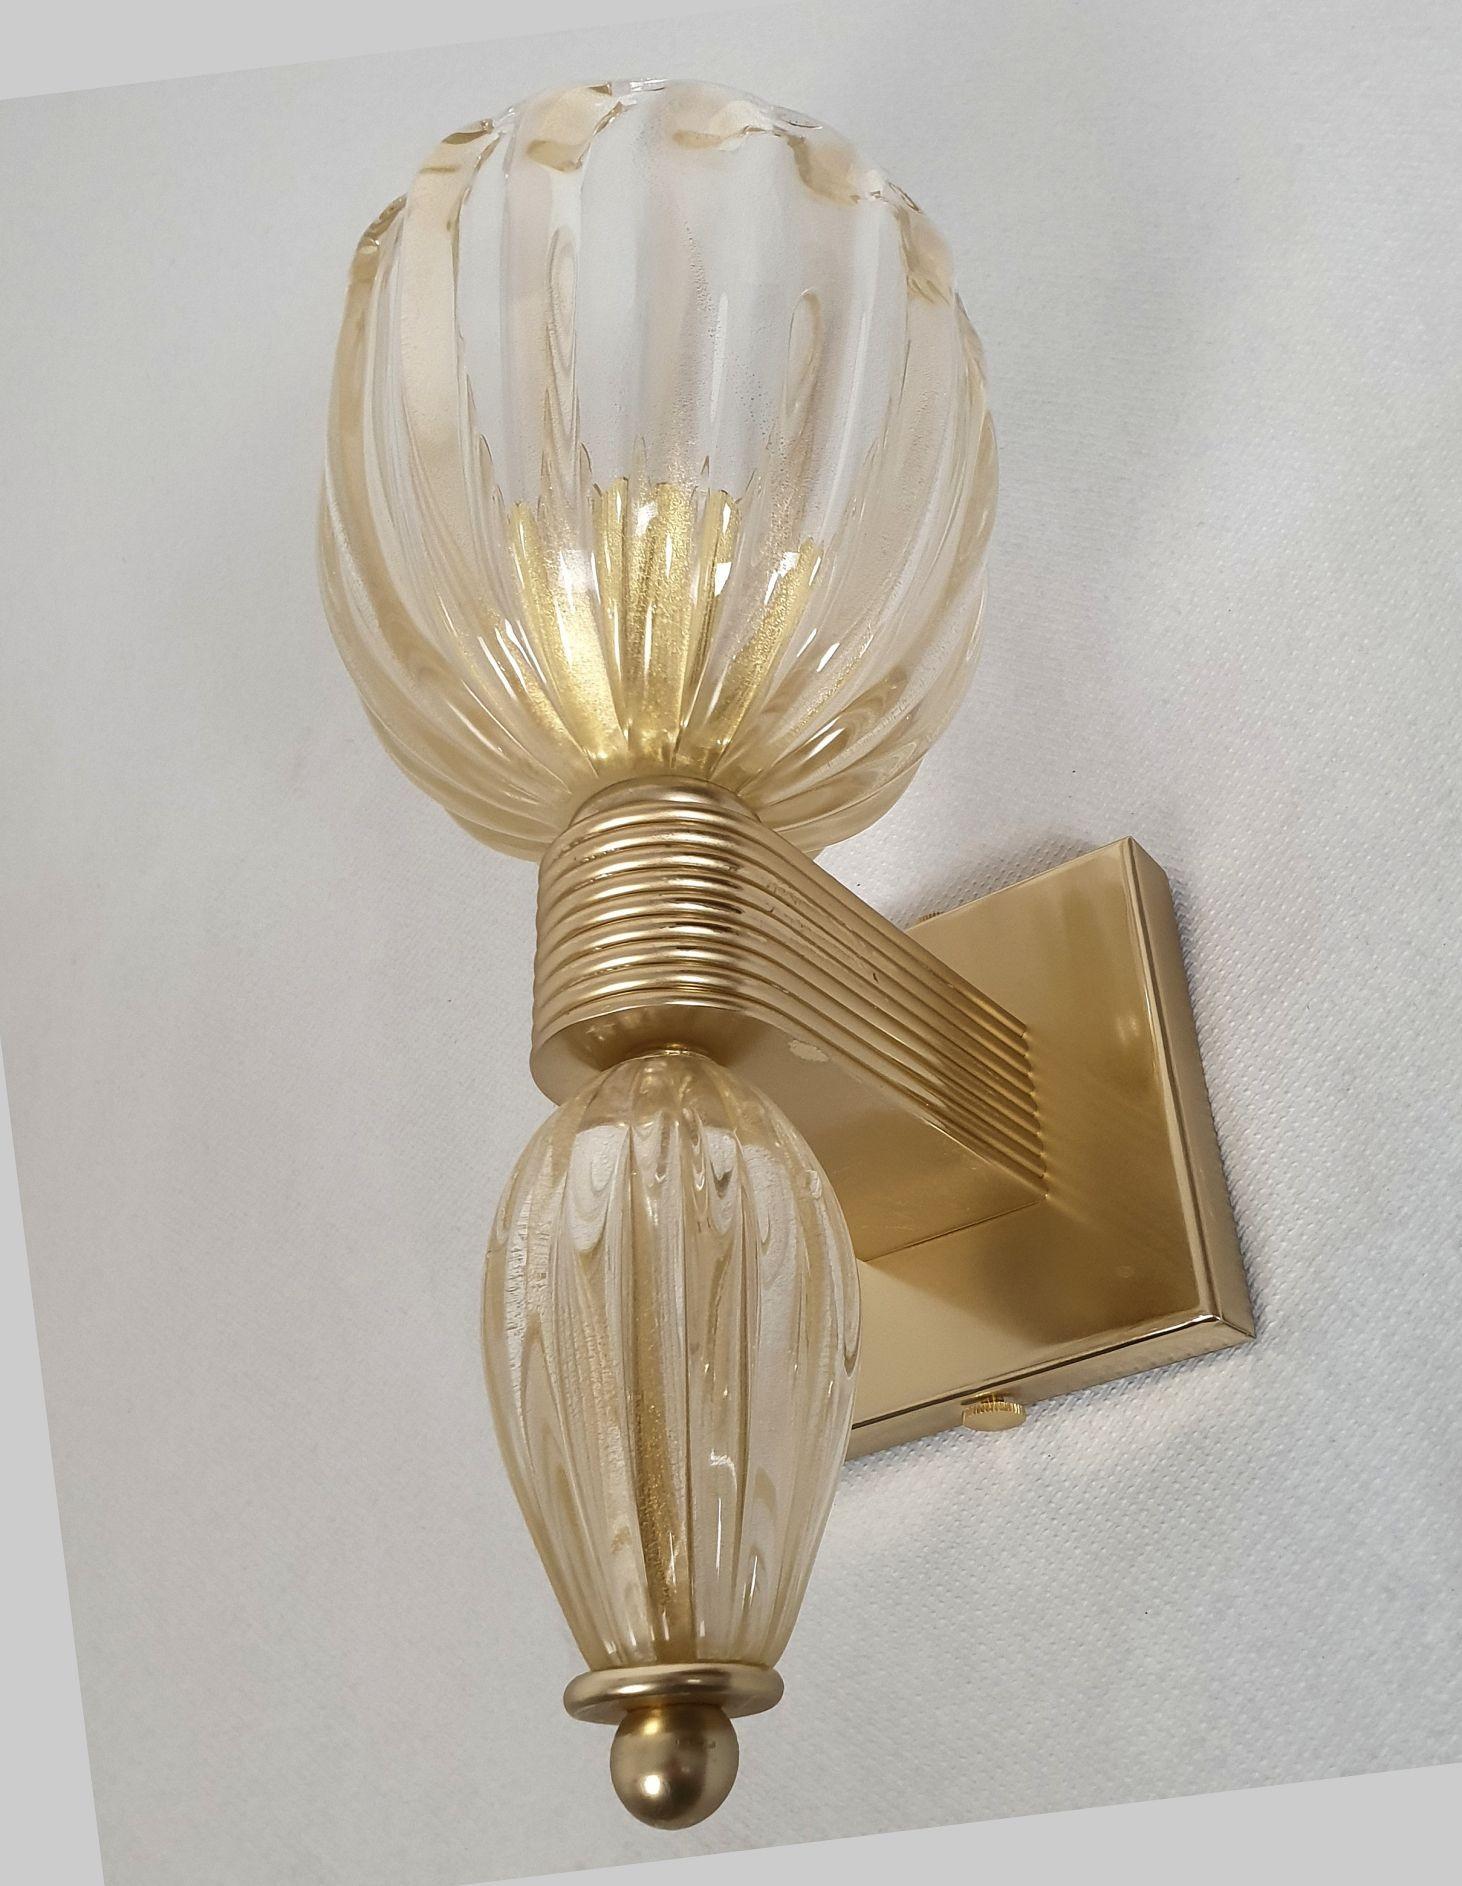 Gold Murano glass sconces Italy - a pair In Excellent Condition For Sale In Dallas, TX